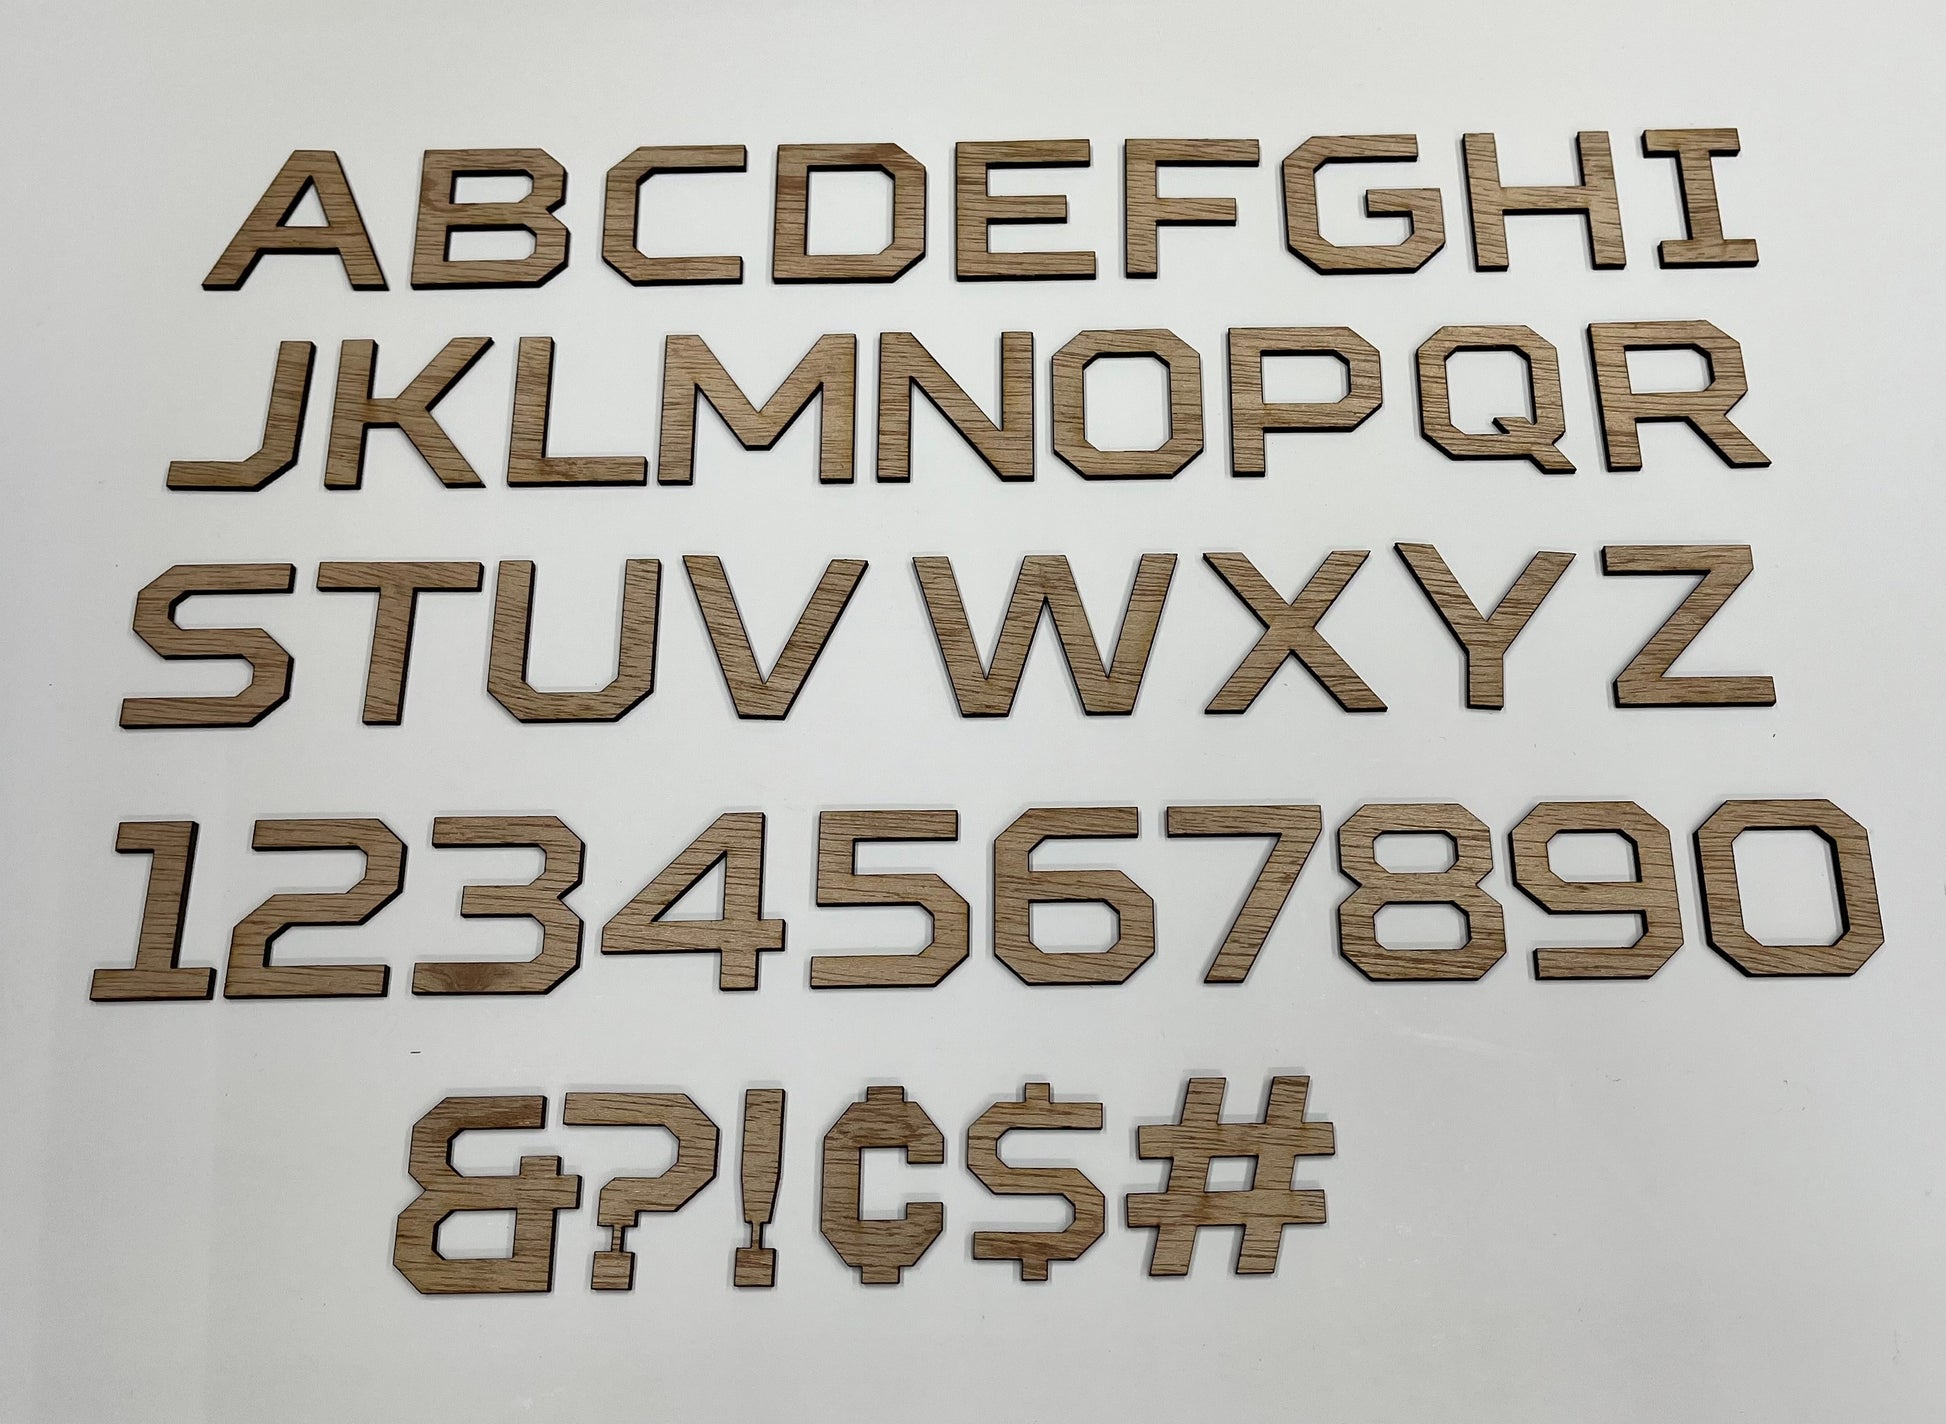 Gold Metallic Letters & Numbers Stickers